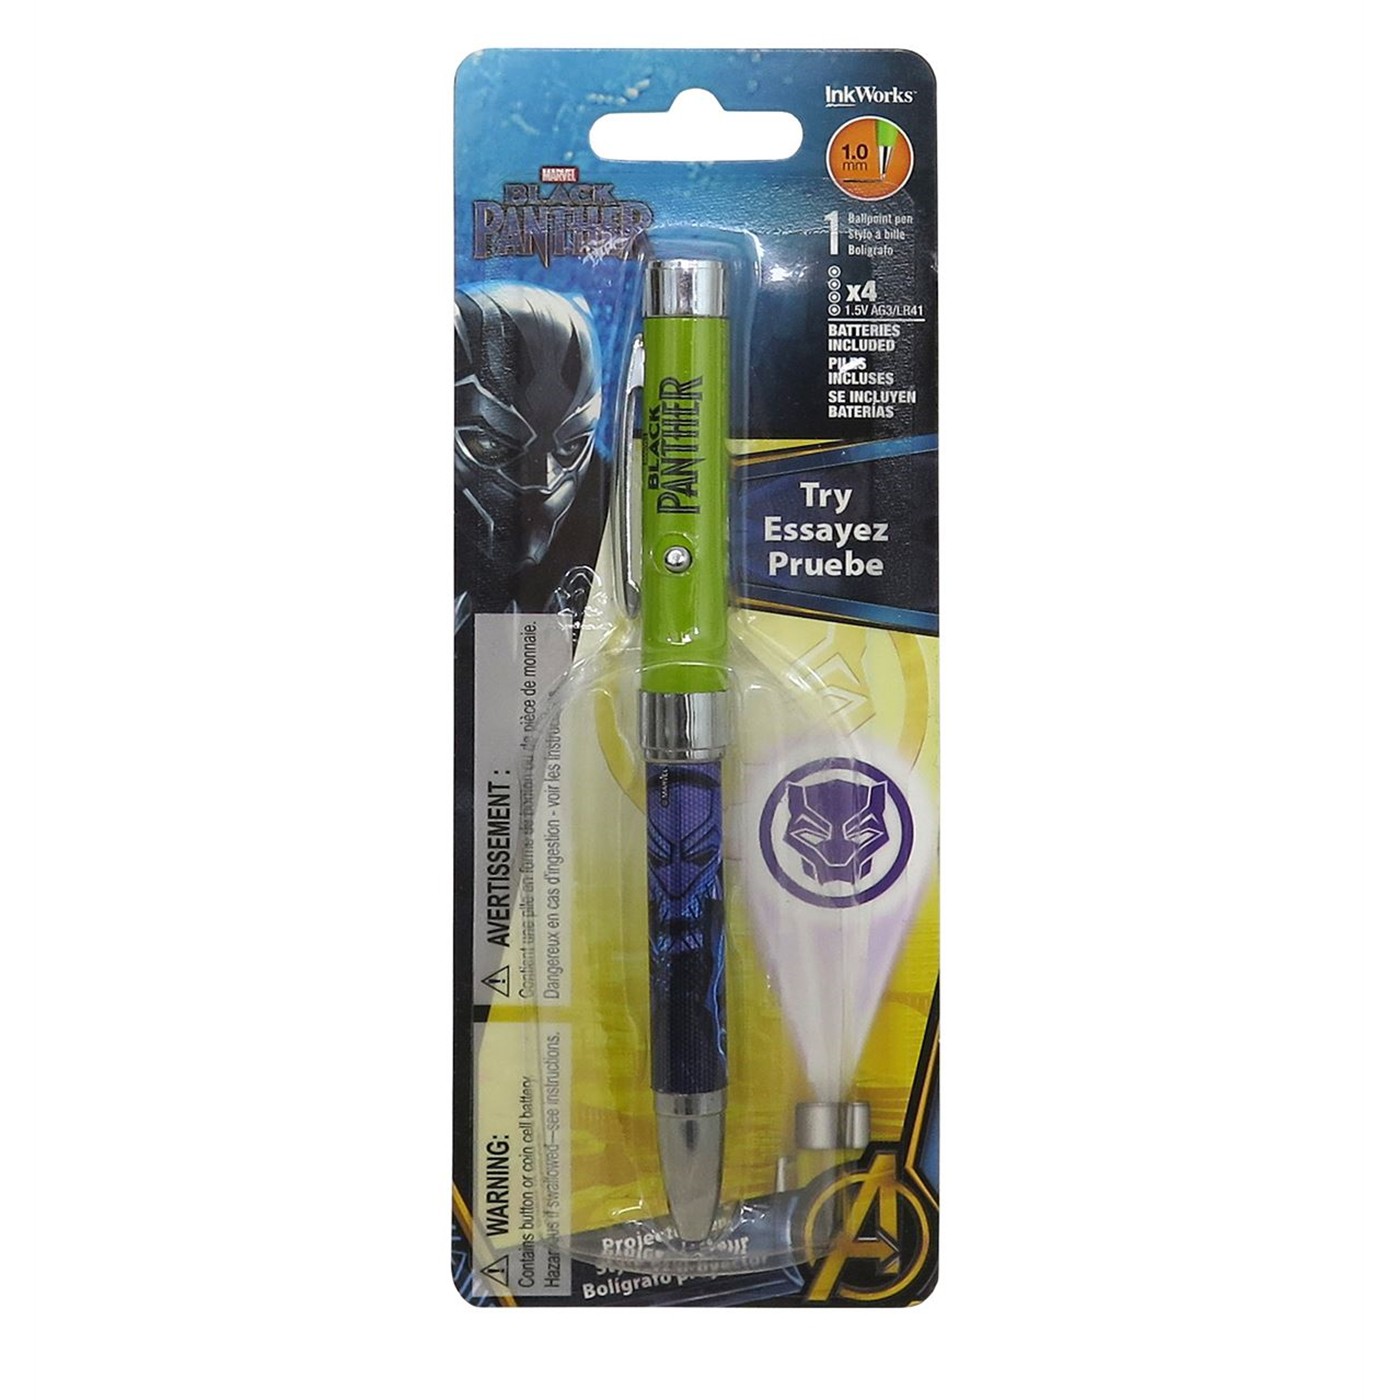 Black Panther Movie Projector Pen